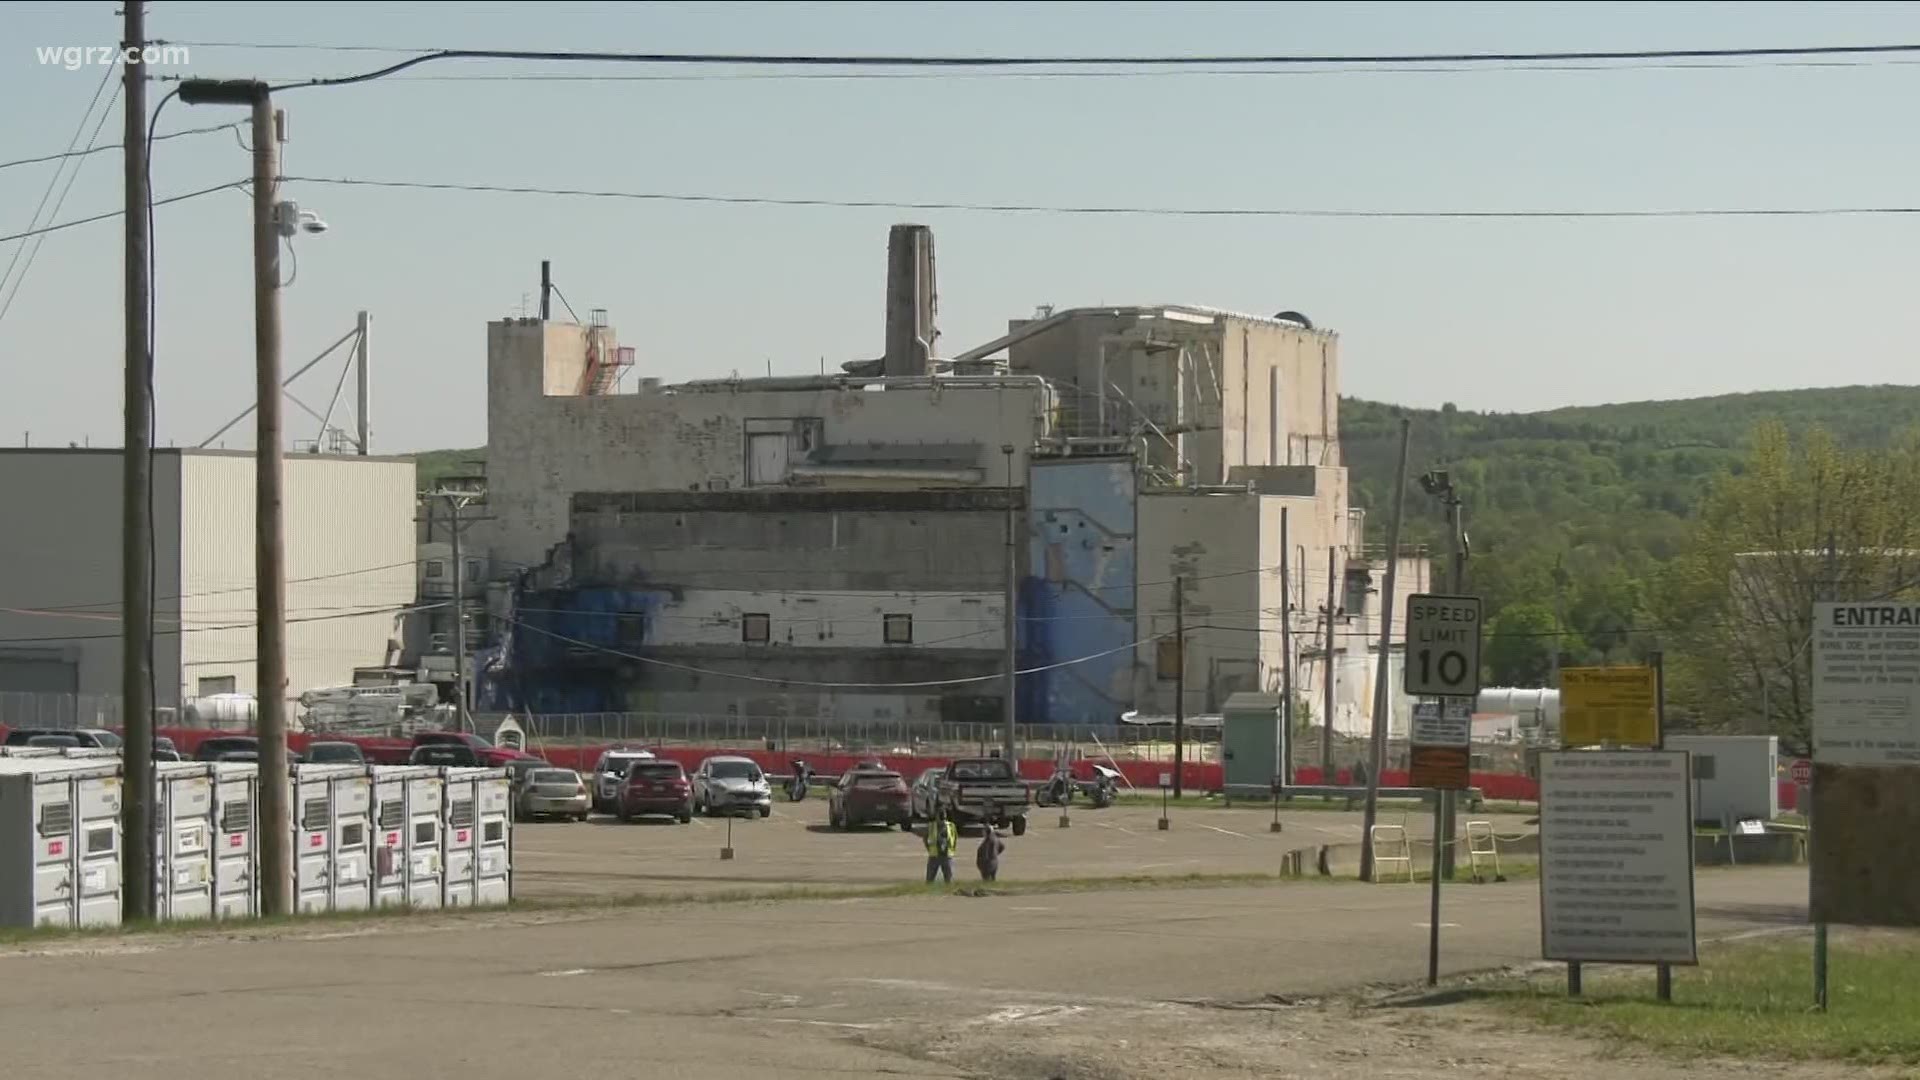 Officials and activists want extra precautions taken to prevent the release of radioactive dust and debris.